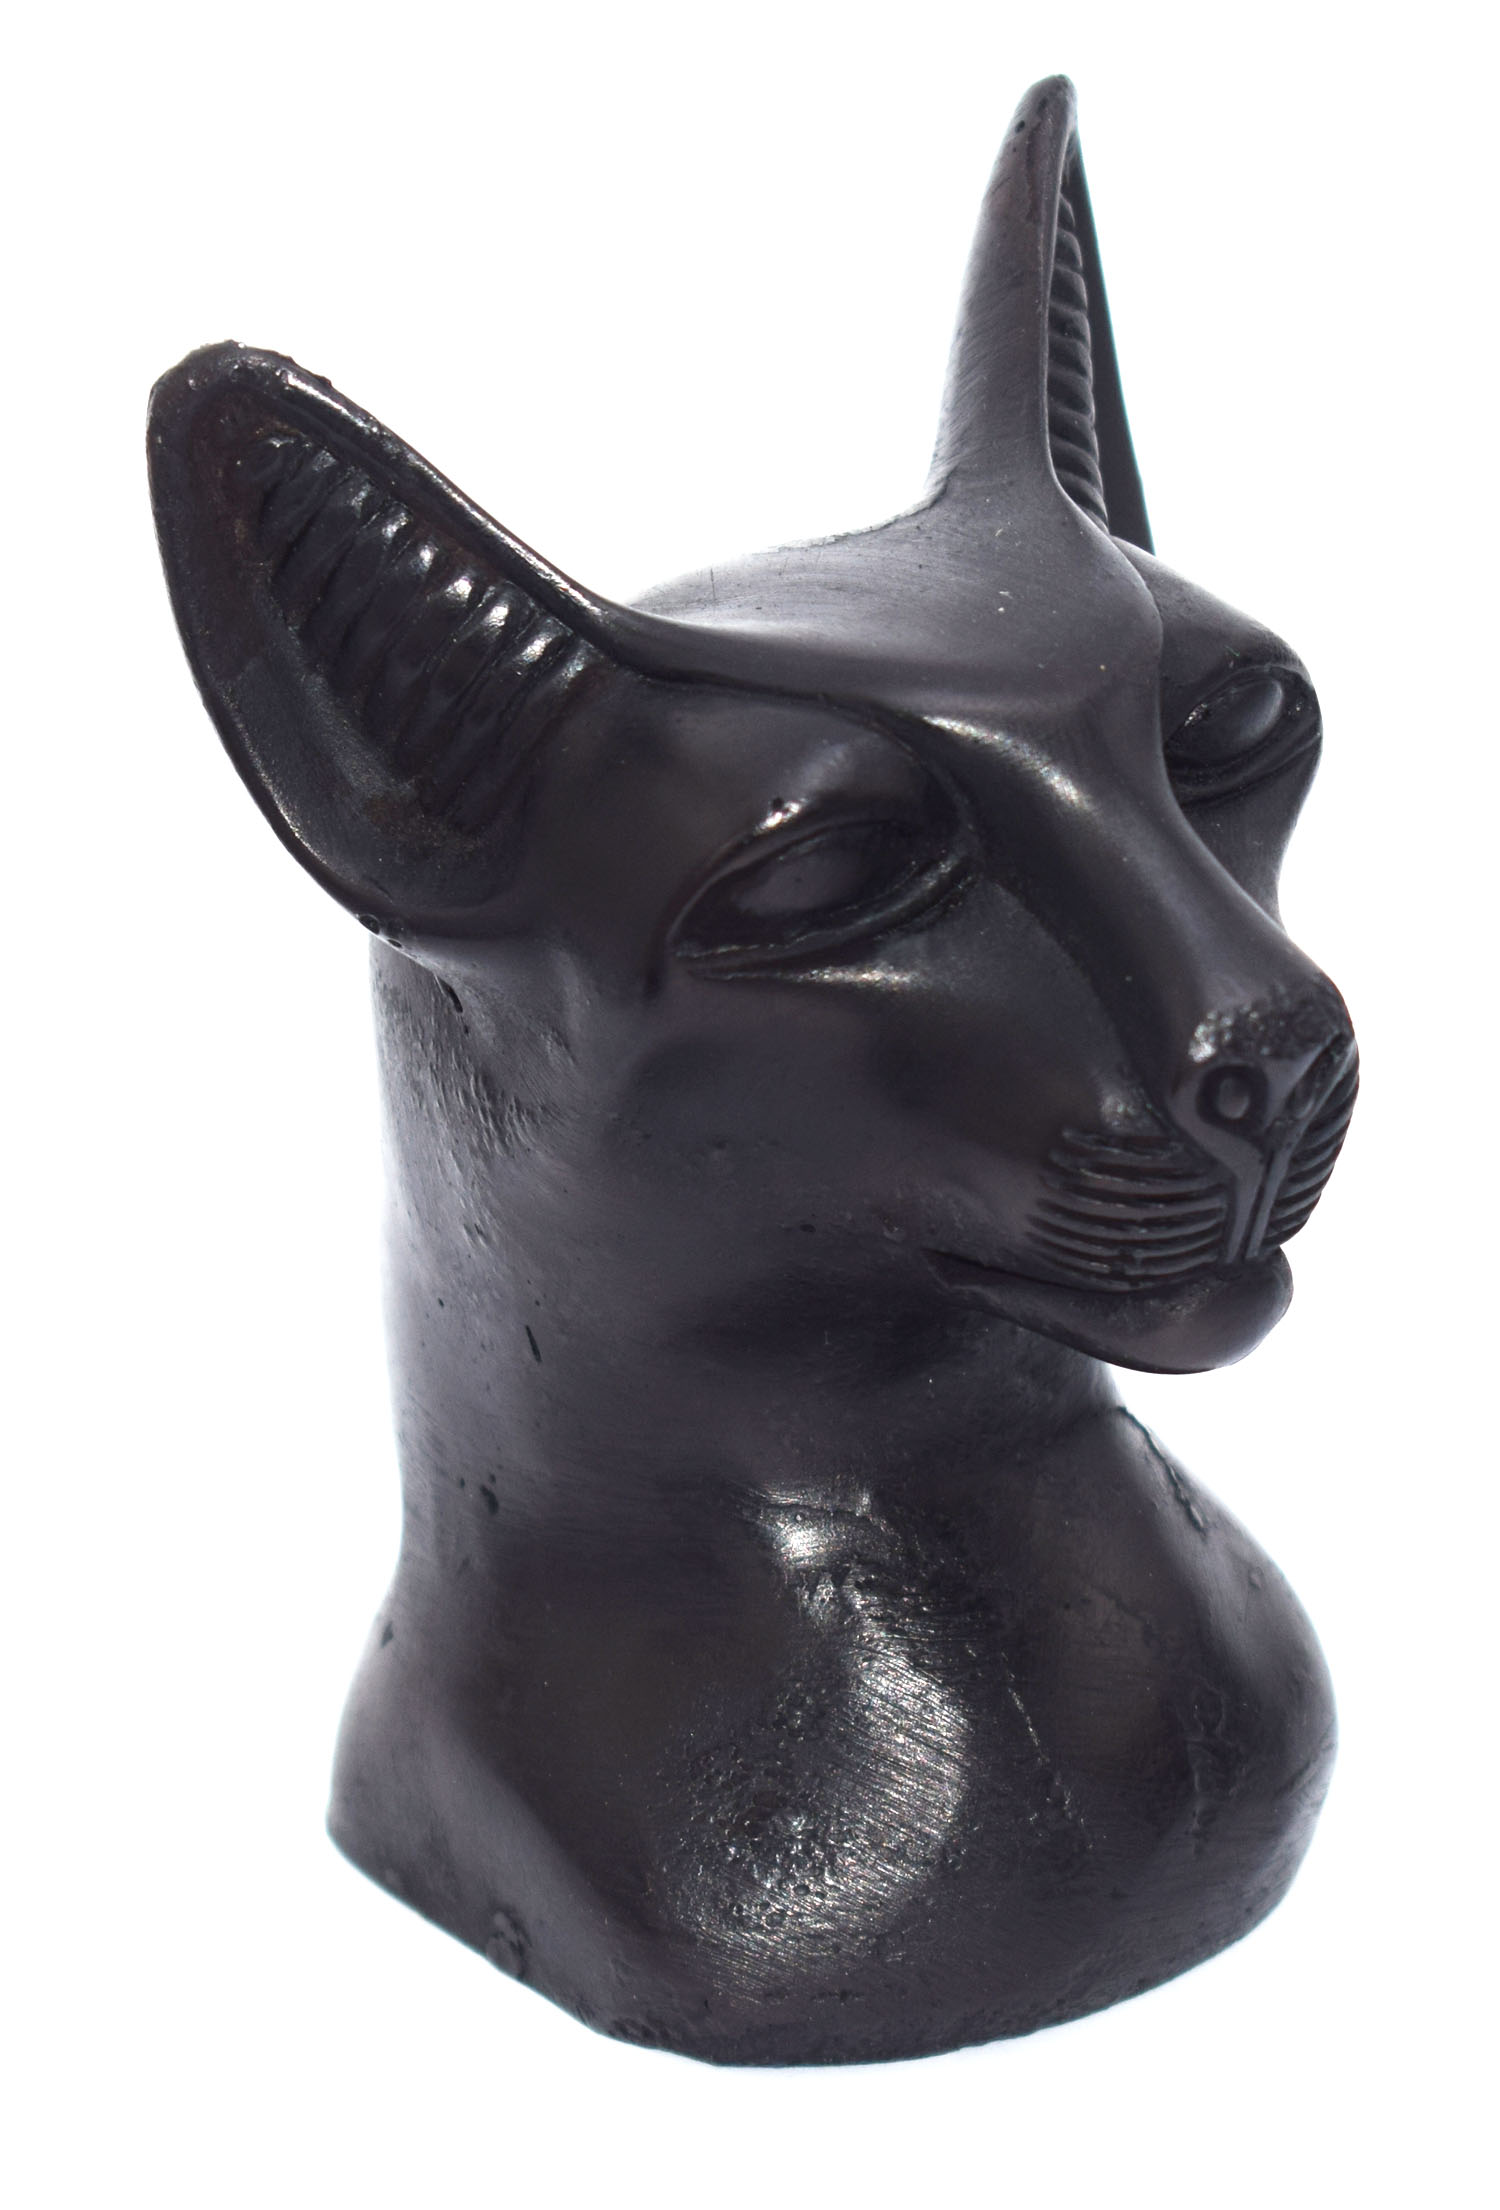 immatgar pharaonic Egyptian cat bastet Head Statue Egyptian souvenirs gifts  for Women Girls and mother ( Black - 10.5 CM long )